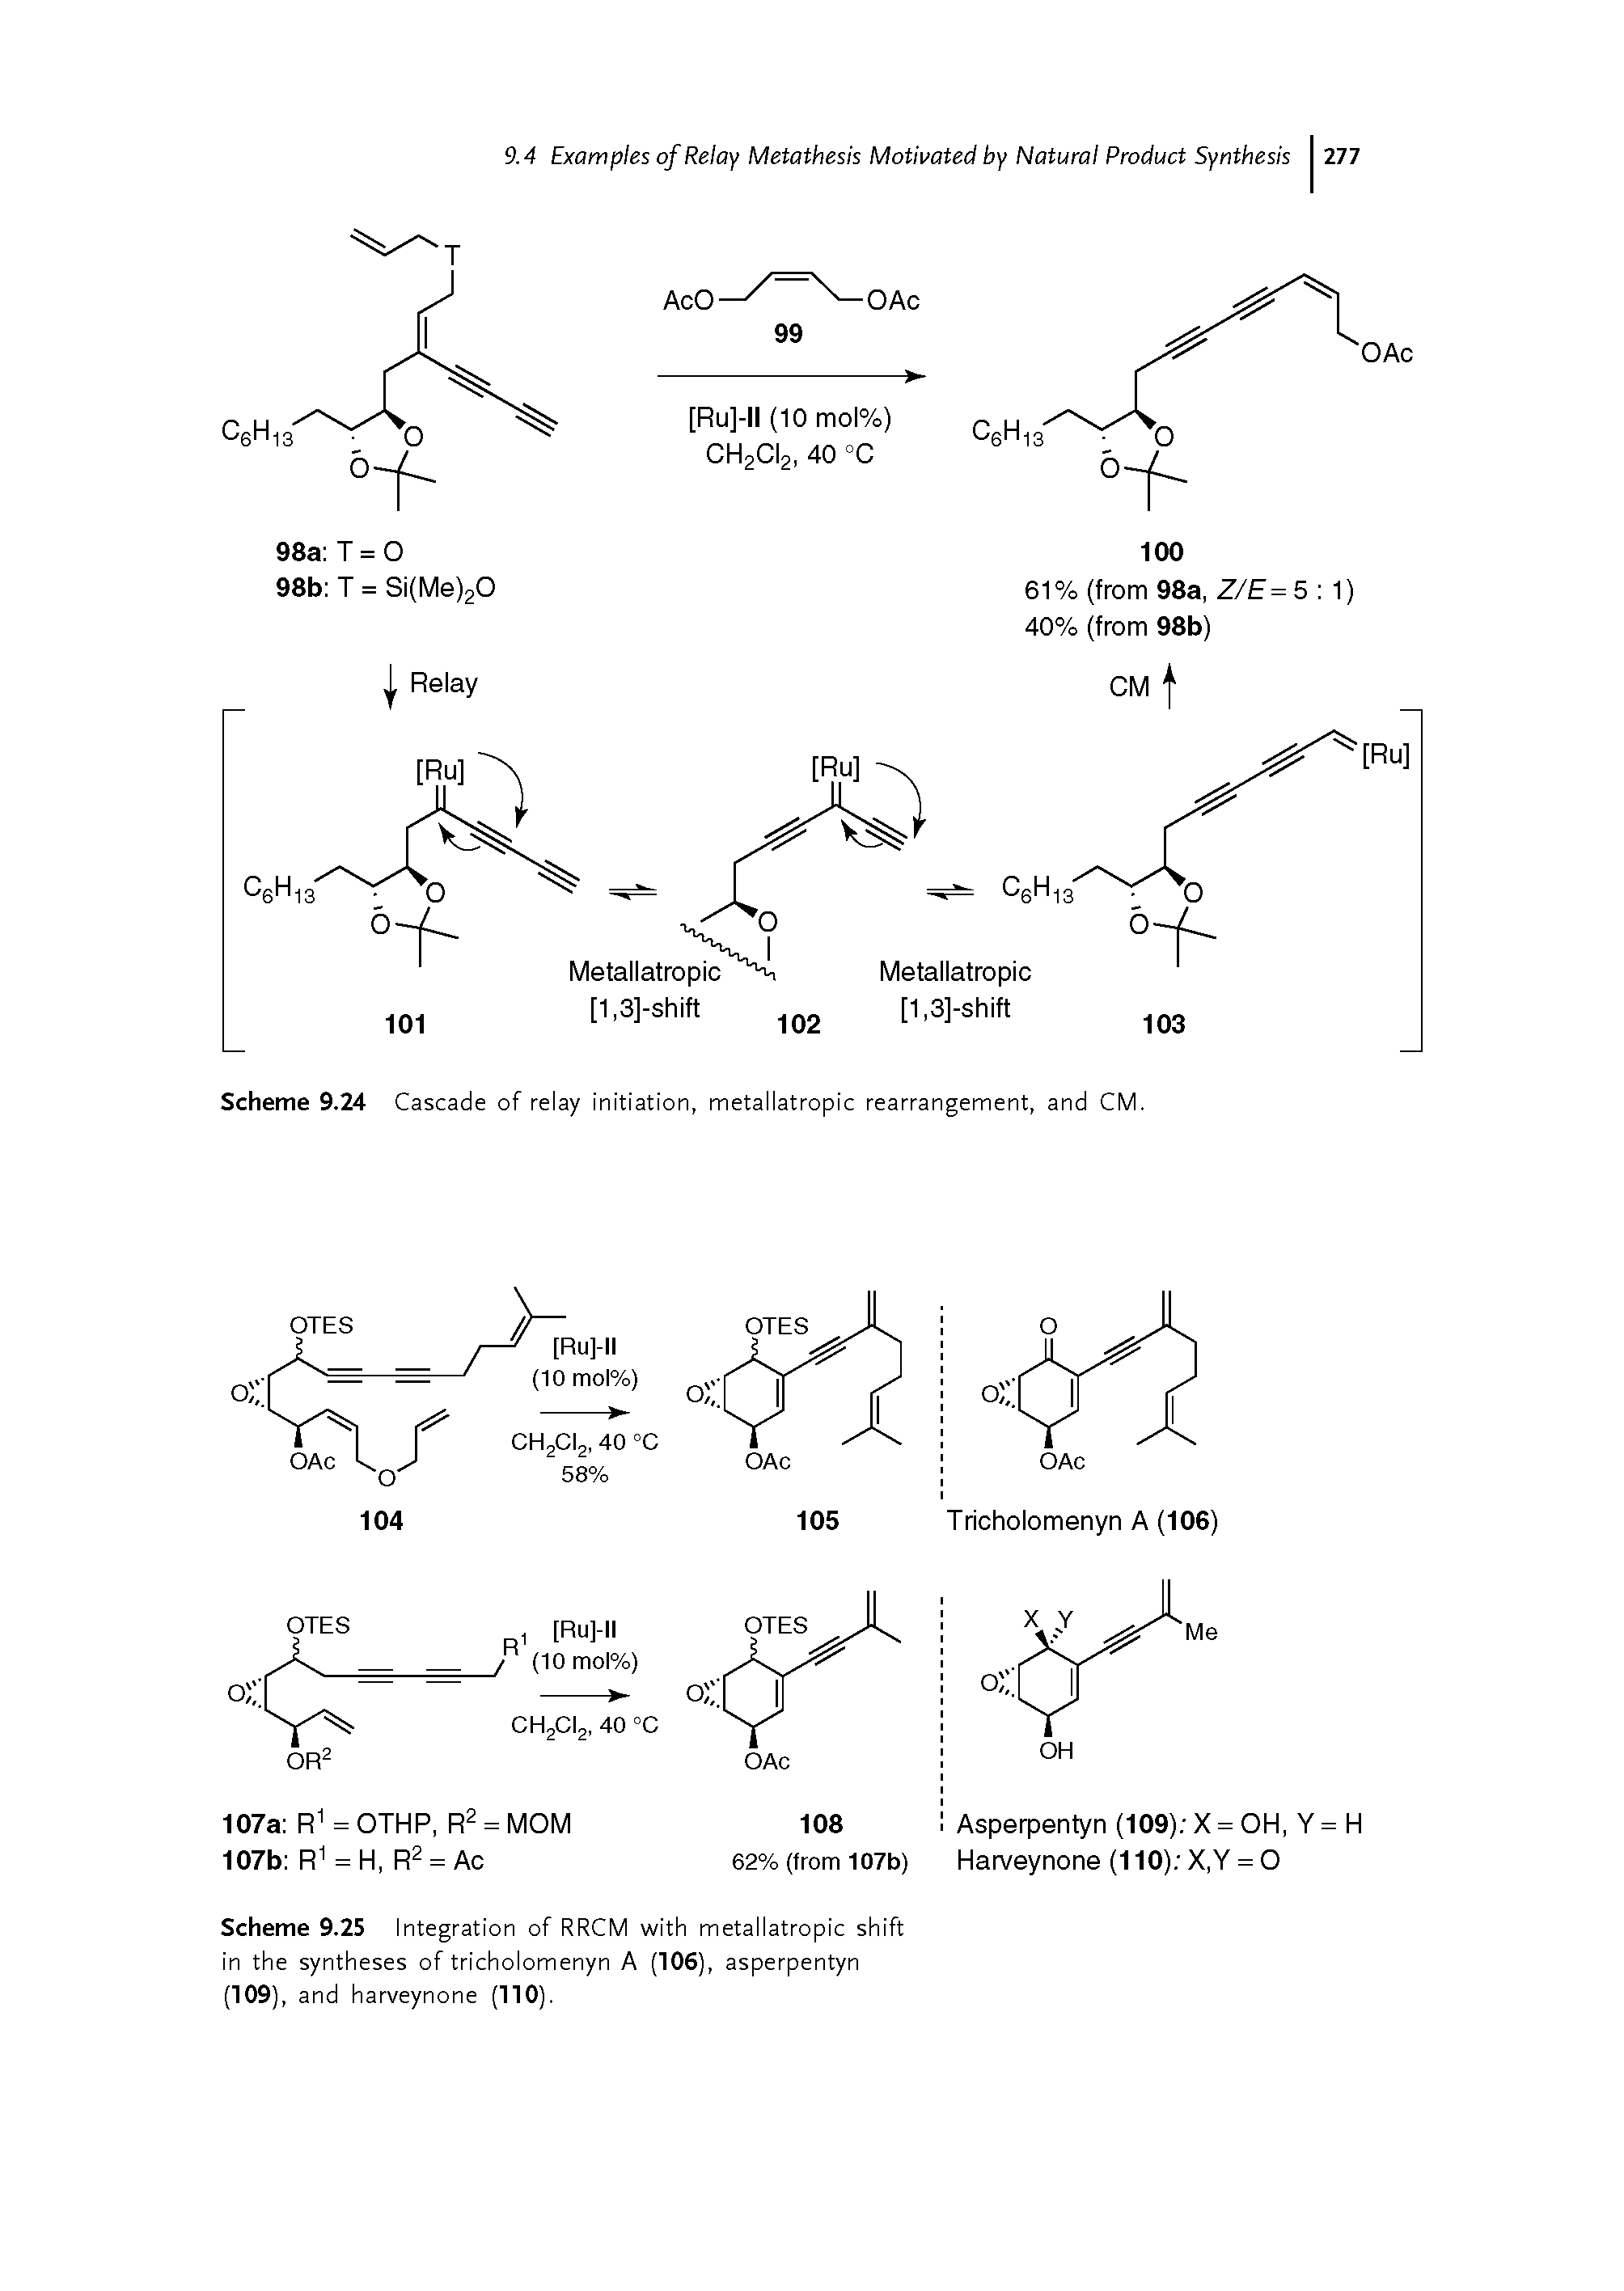 Scheme 9.25 Integration of RRCM with metallatropic shift in the syntheses of tricholomenyn A (106), asperpentyn (109), a nd harveynone (110).